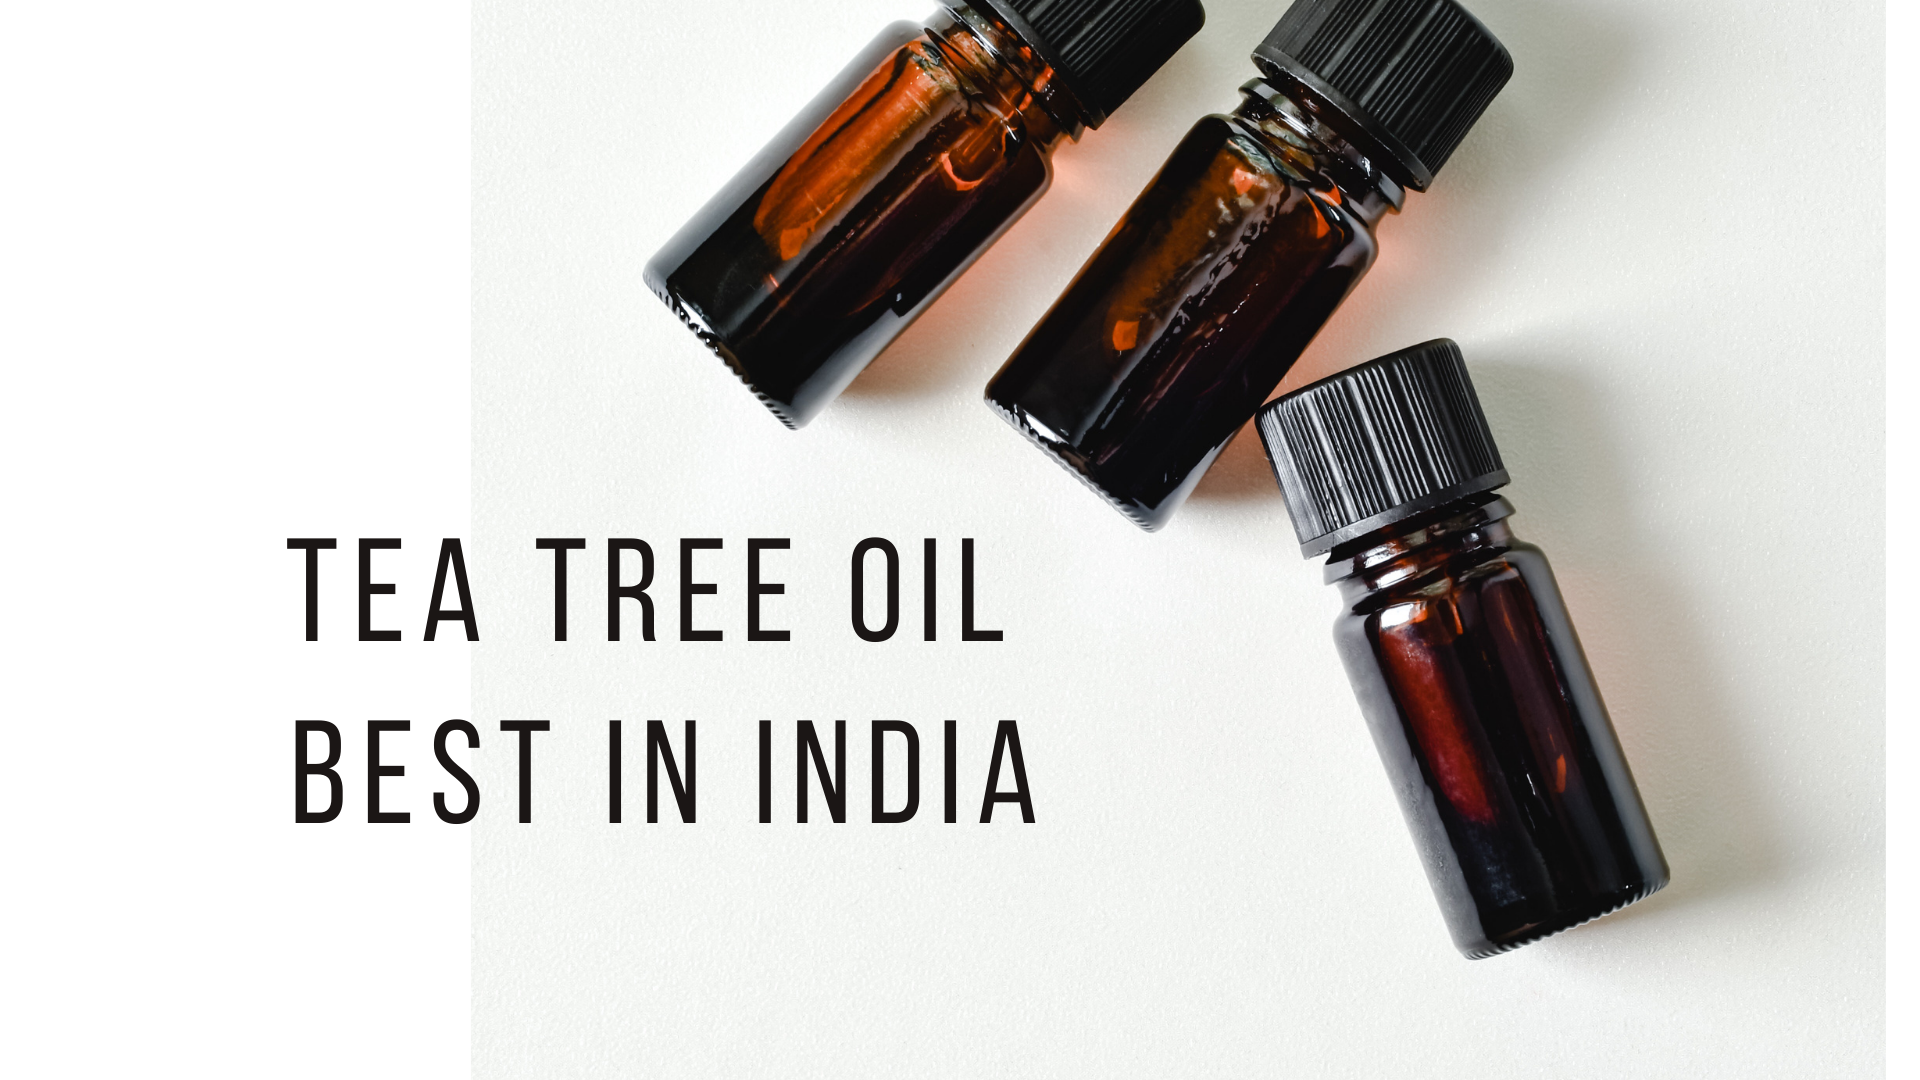 16 Best Tea Tree Oil In India - Top Brands, Its Usage And Benefits 